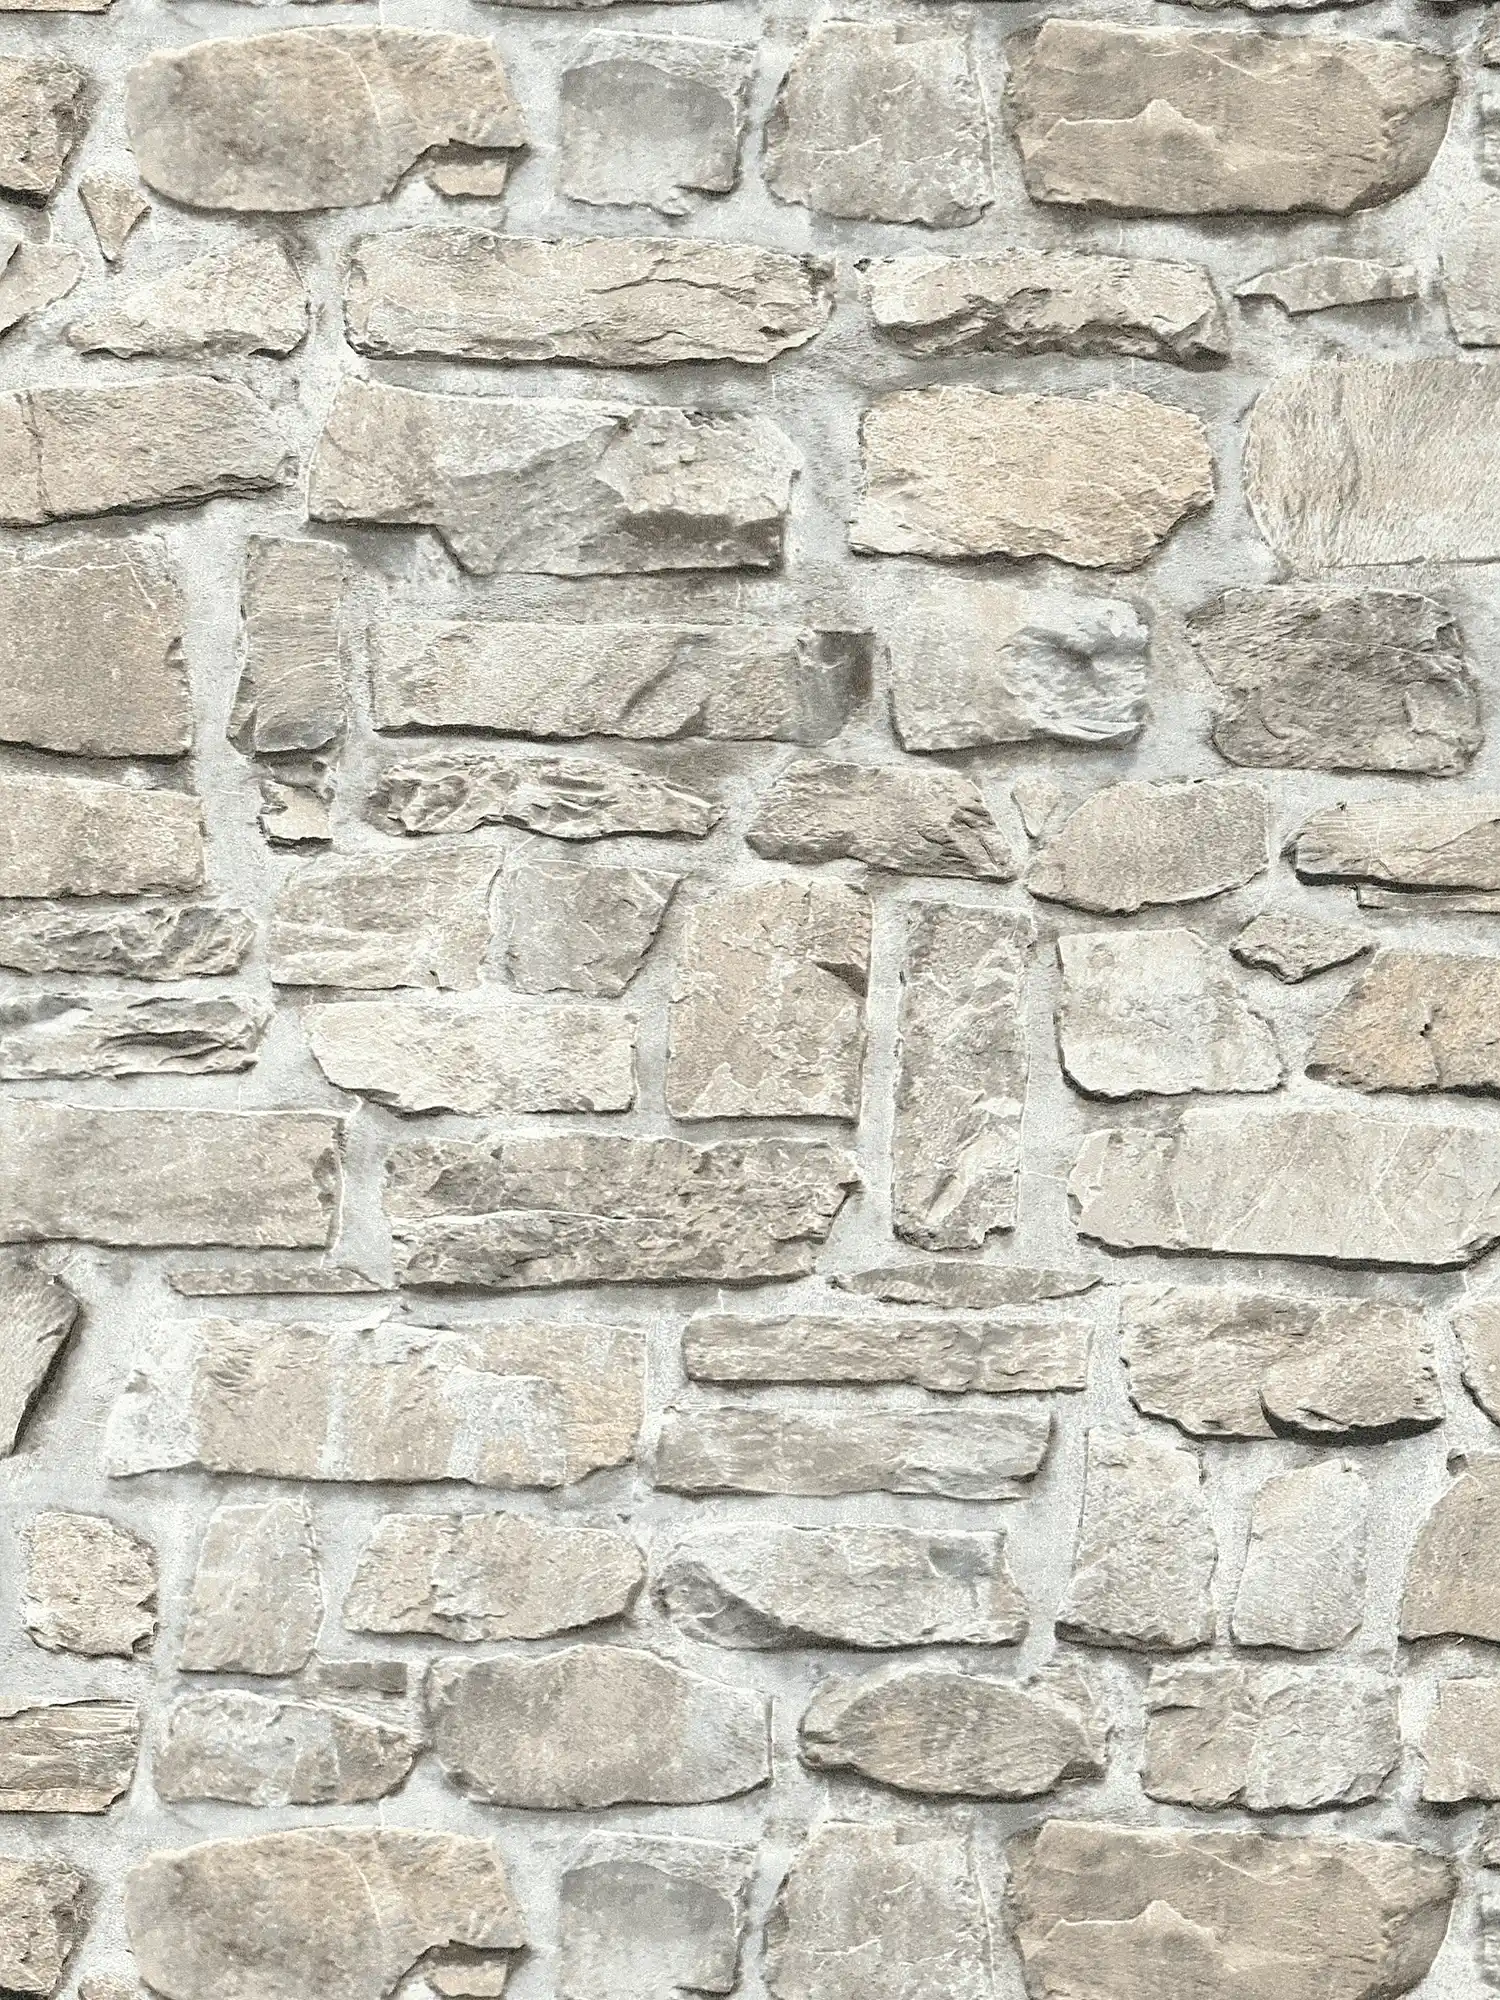         Stone wallpaper with natural stone masonry - grey, beige
    